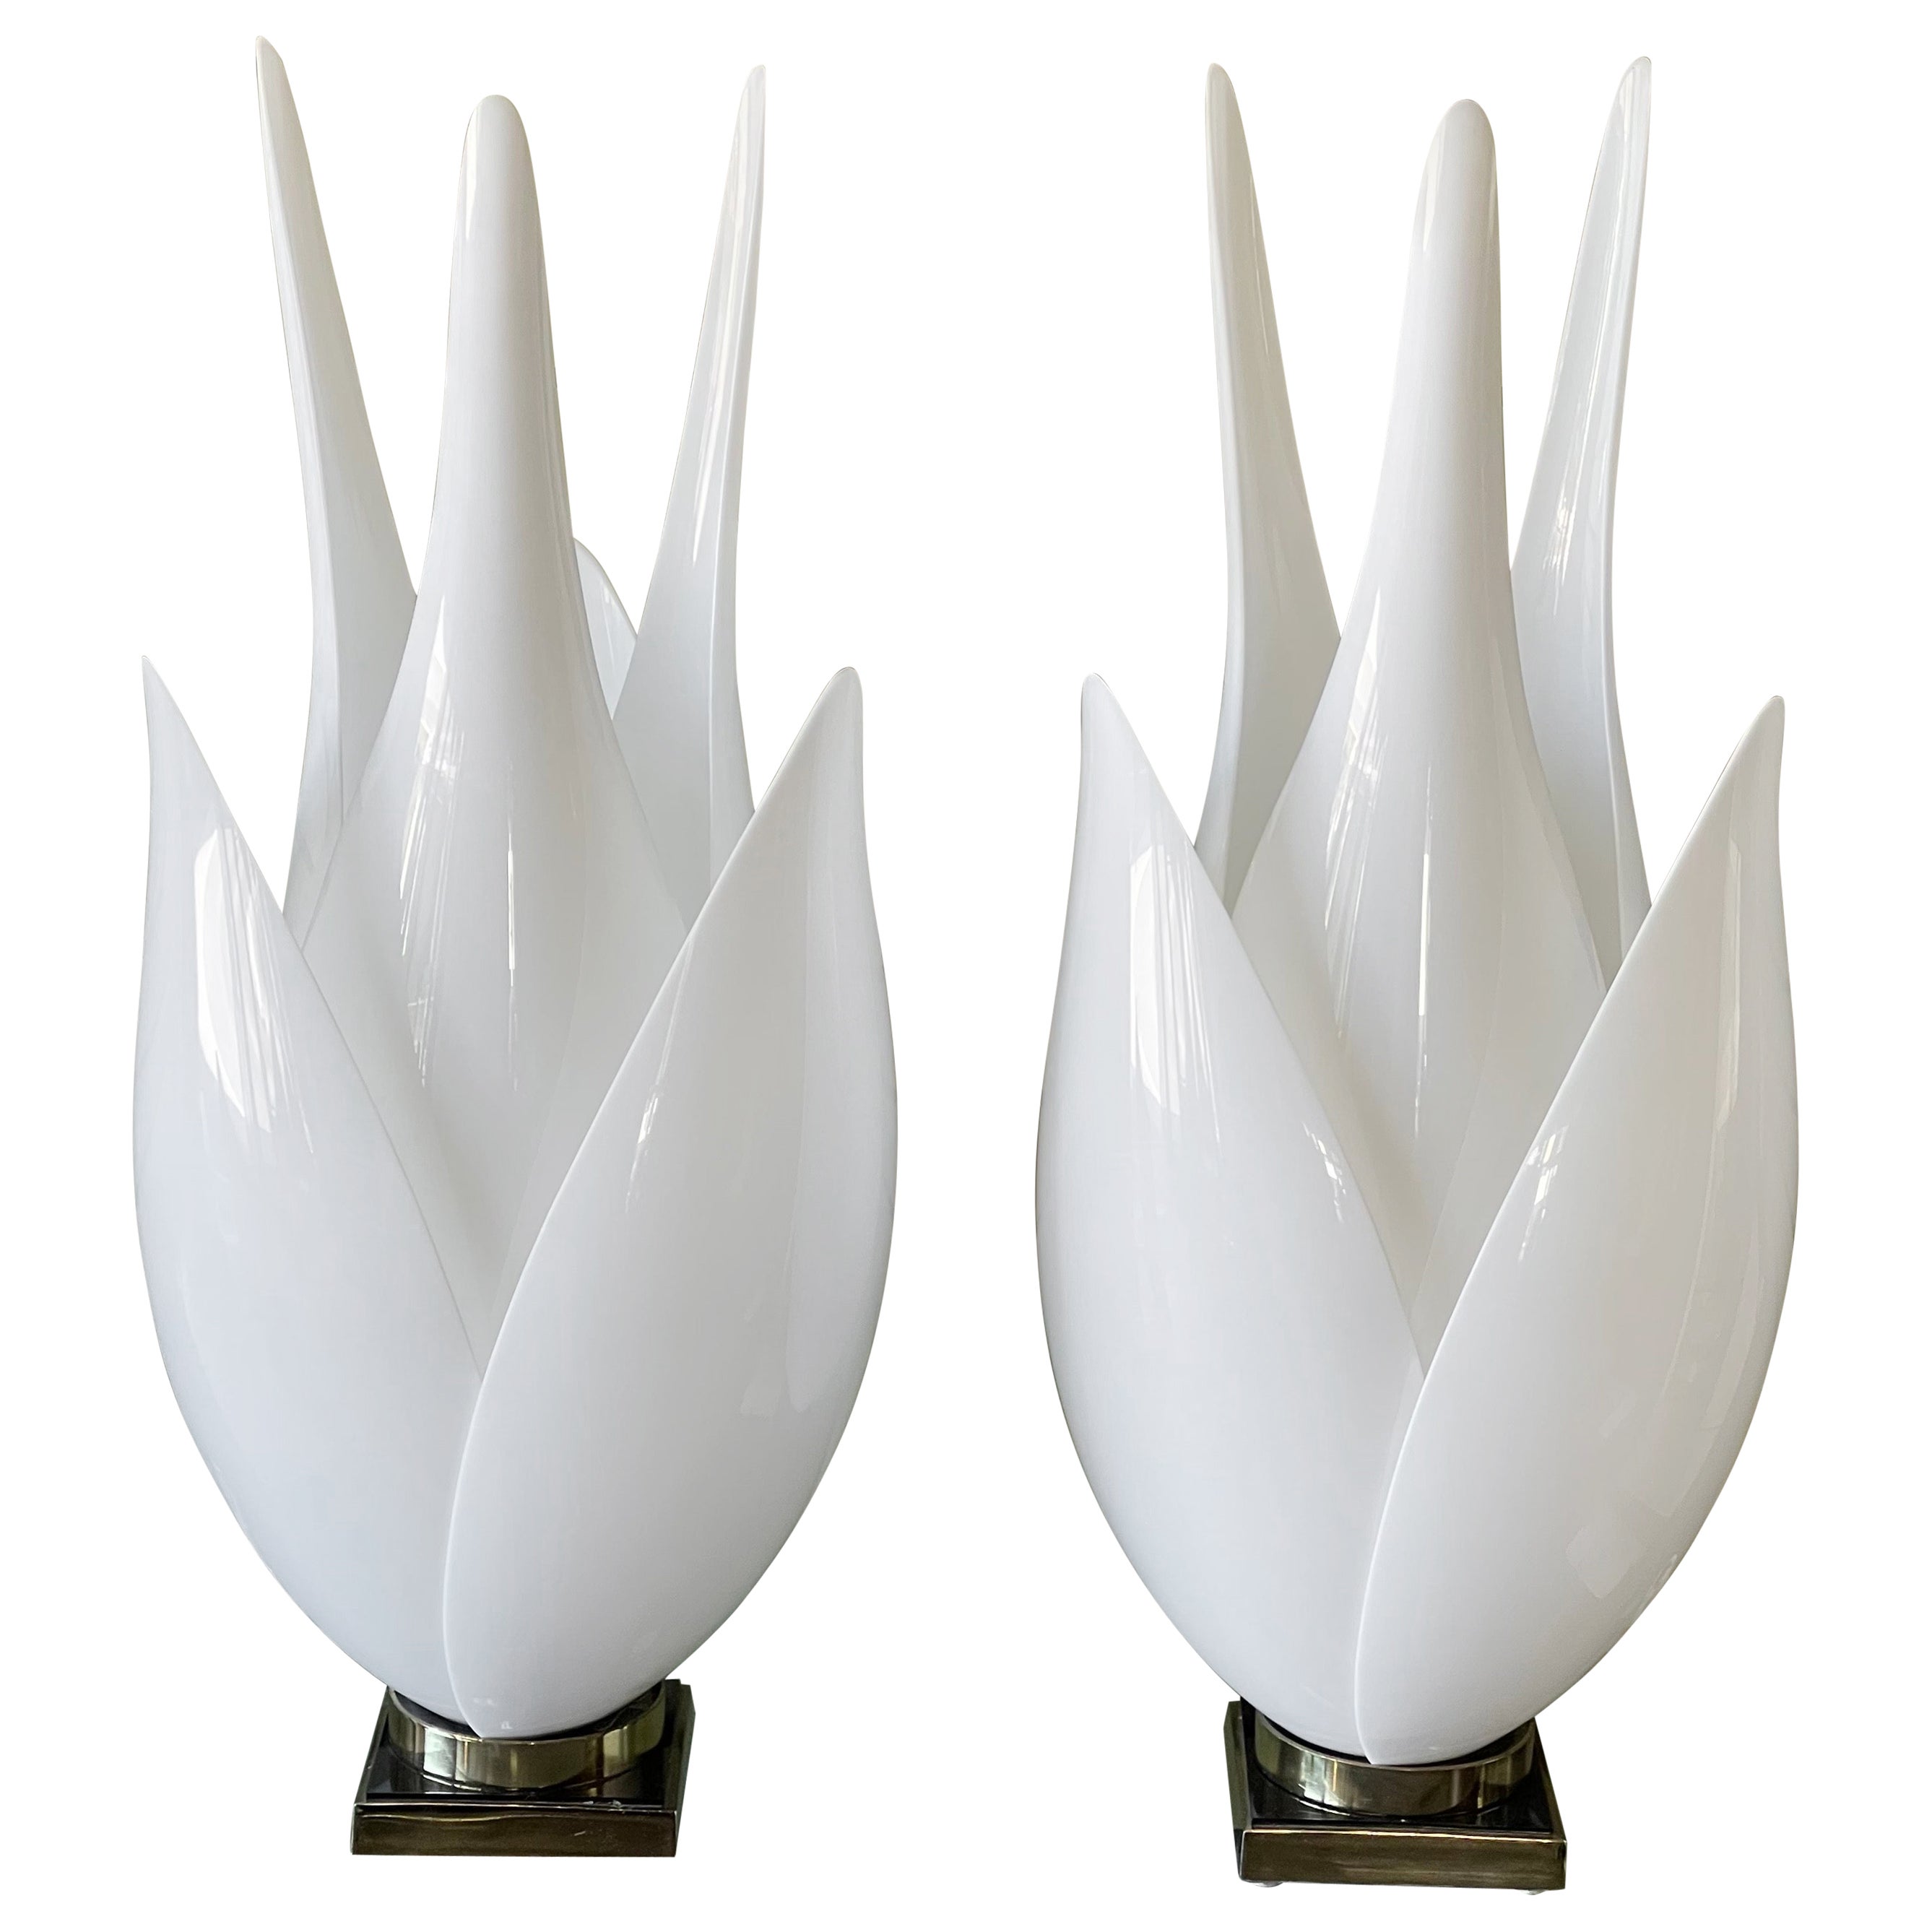 Pair of Vintage Oversized "Tulip" Table Lamps by Roger Rougier